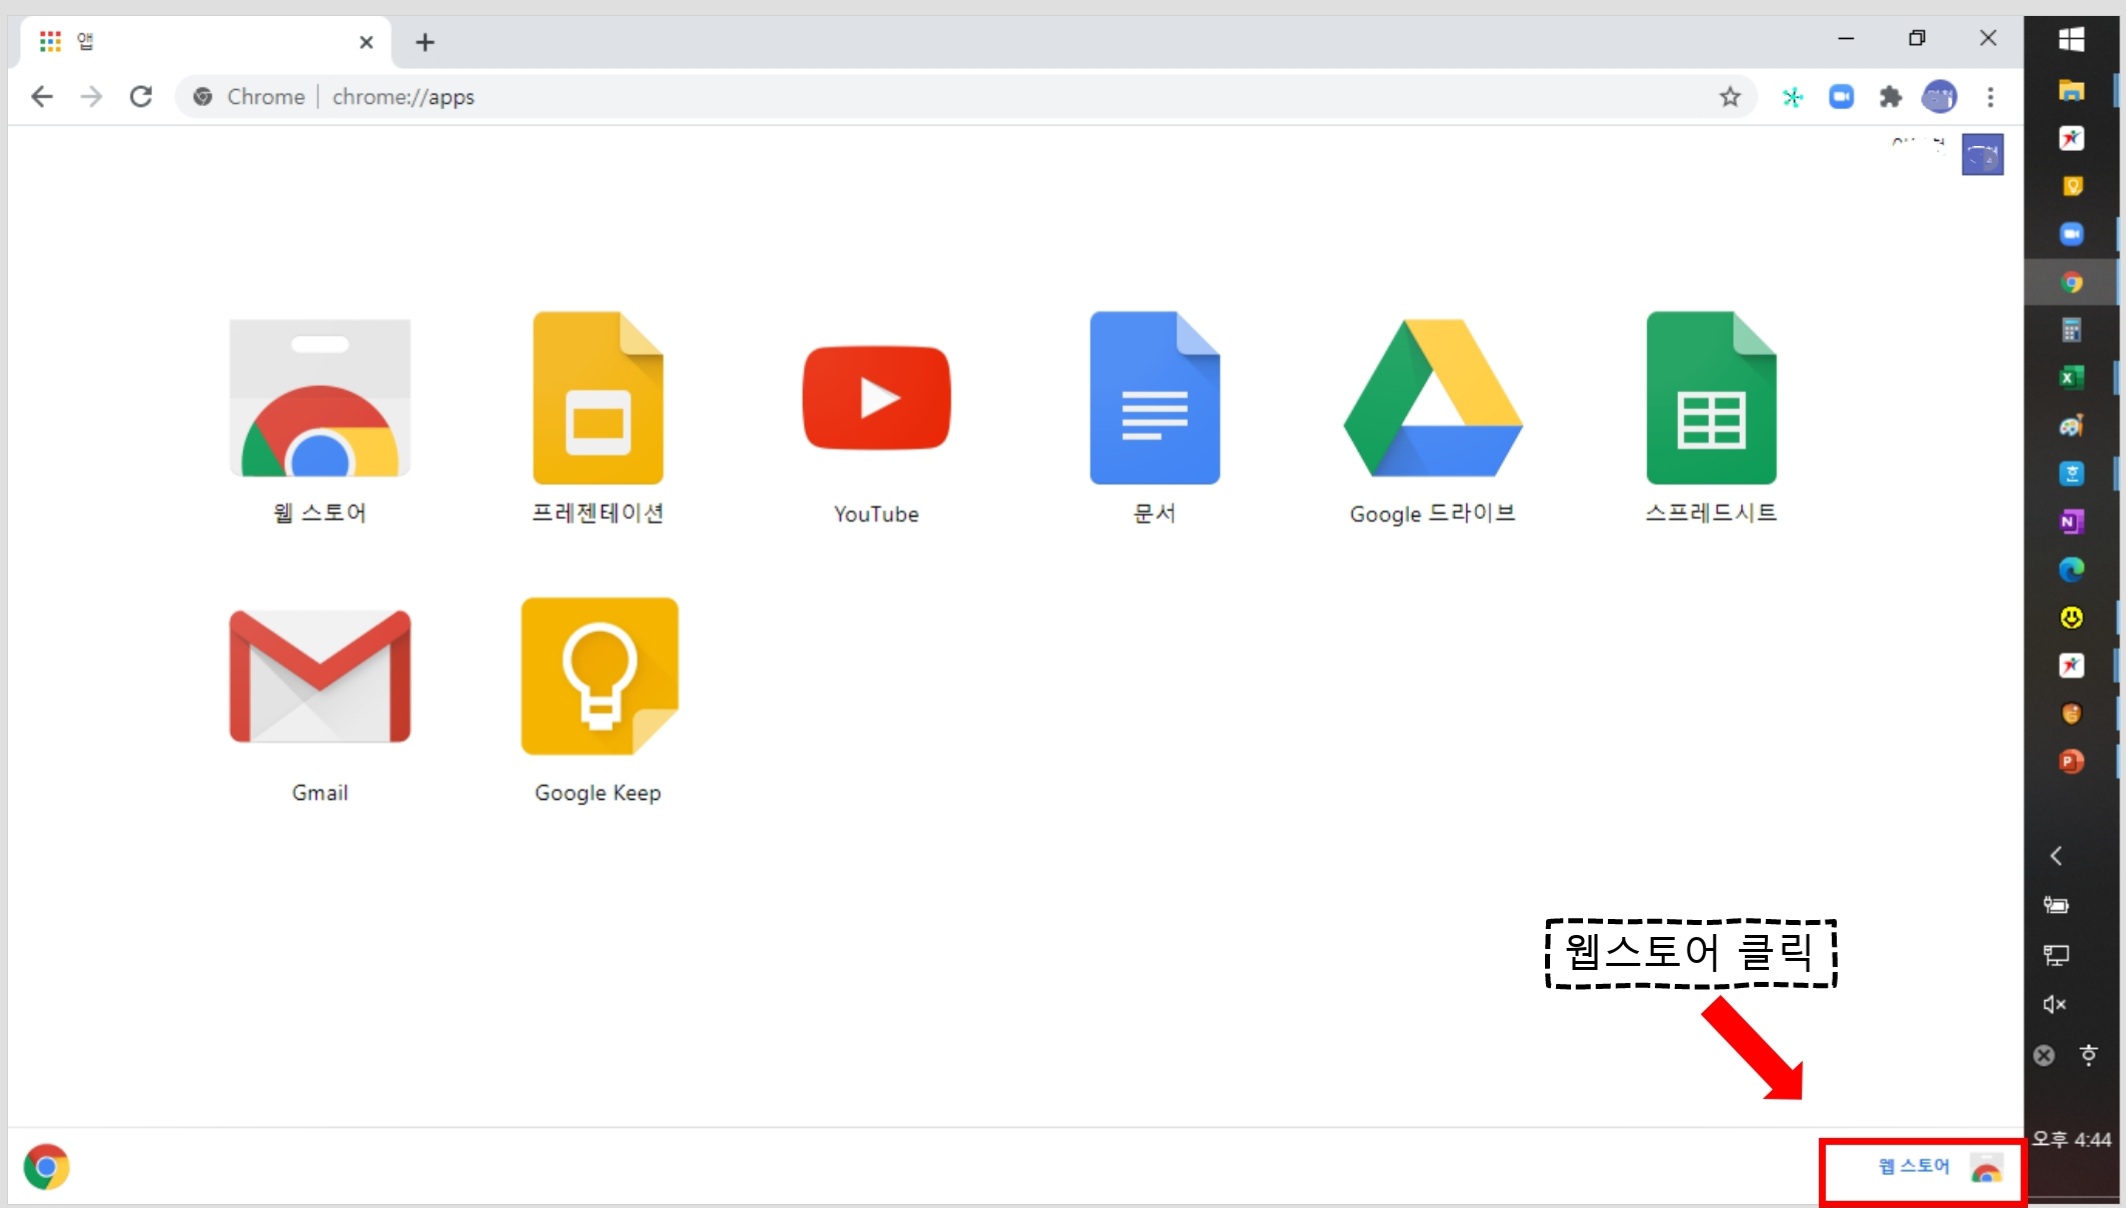 [Google Keep PC version] Run Google Keep as an independent program, not a crop extension (based on Windows 10) #everything #notationNotes #evernoteEvernote